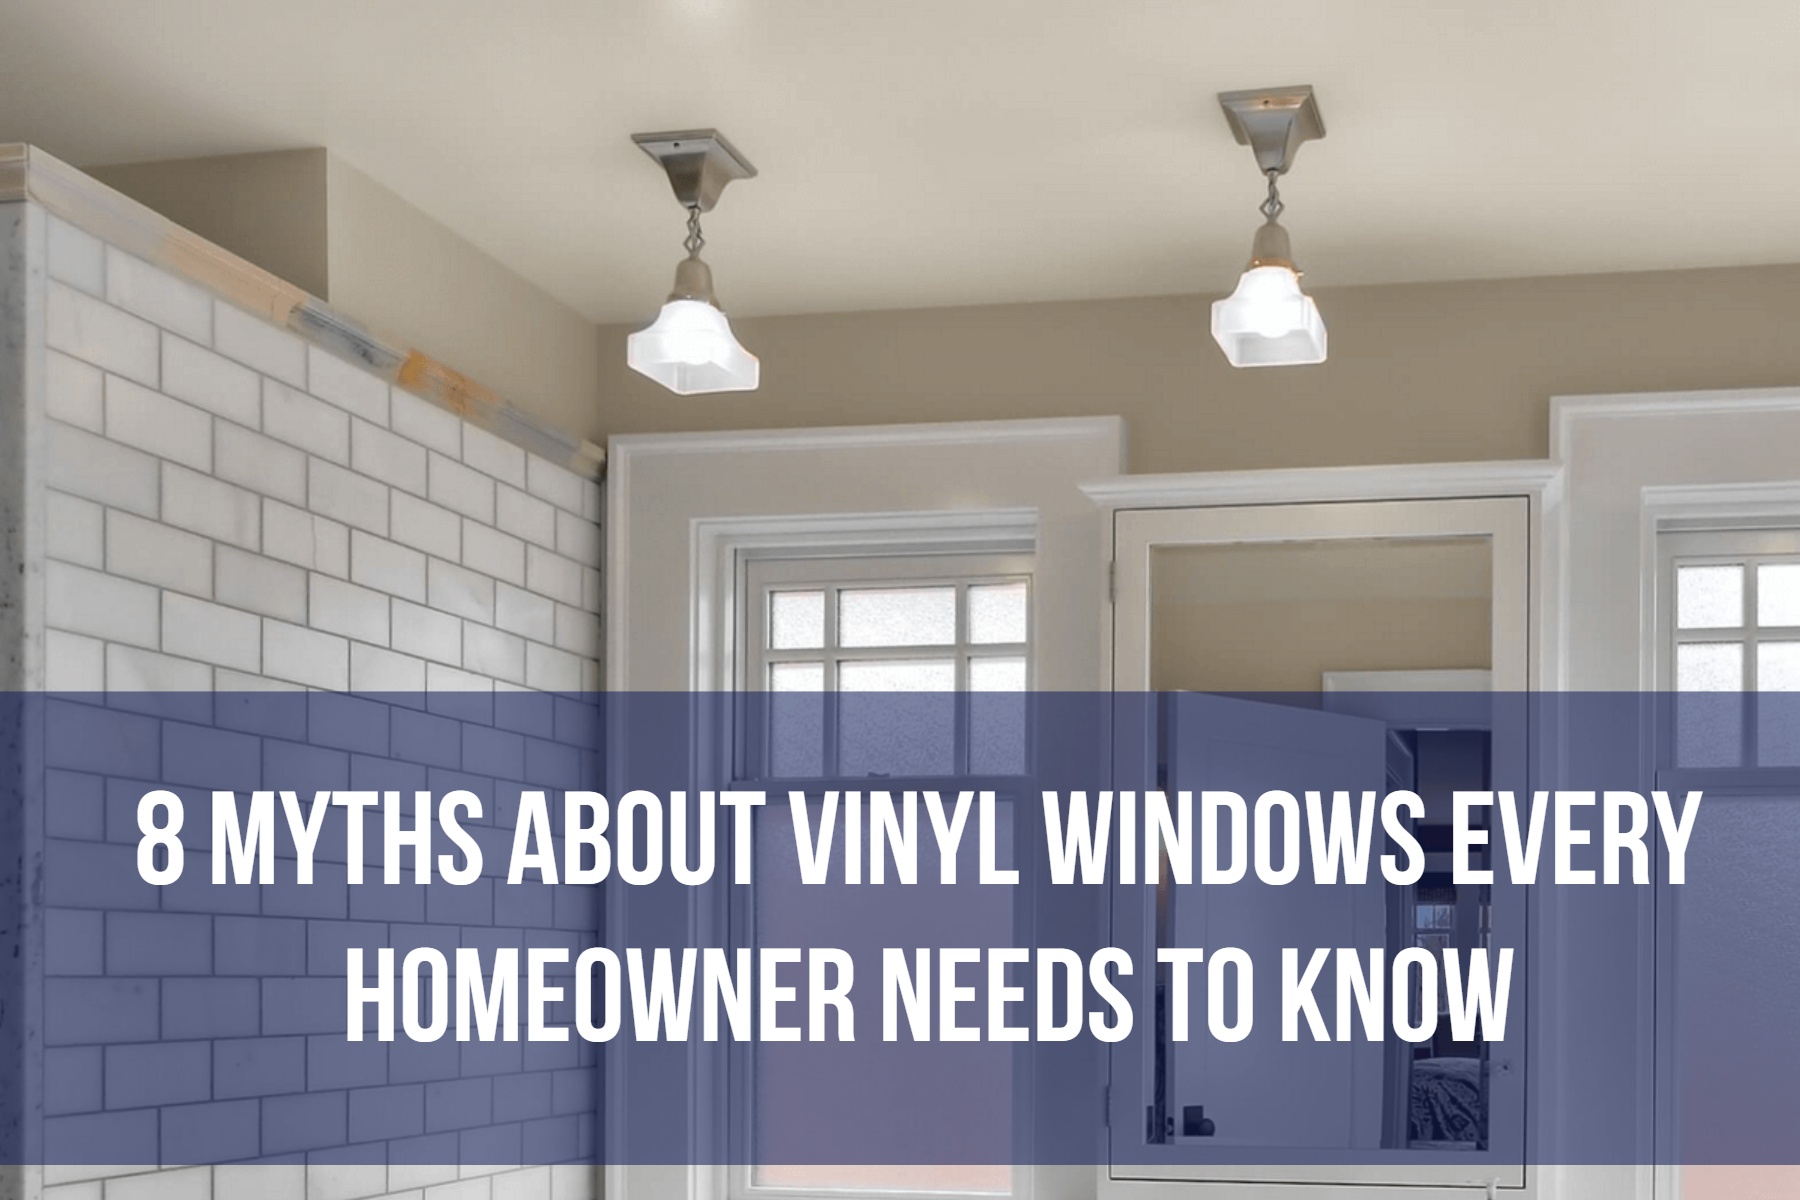 8 Myths About Vinyl Windows Every Homeowner Needs to Know